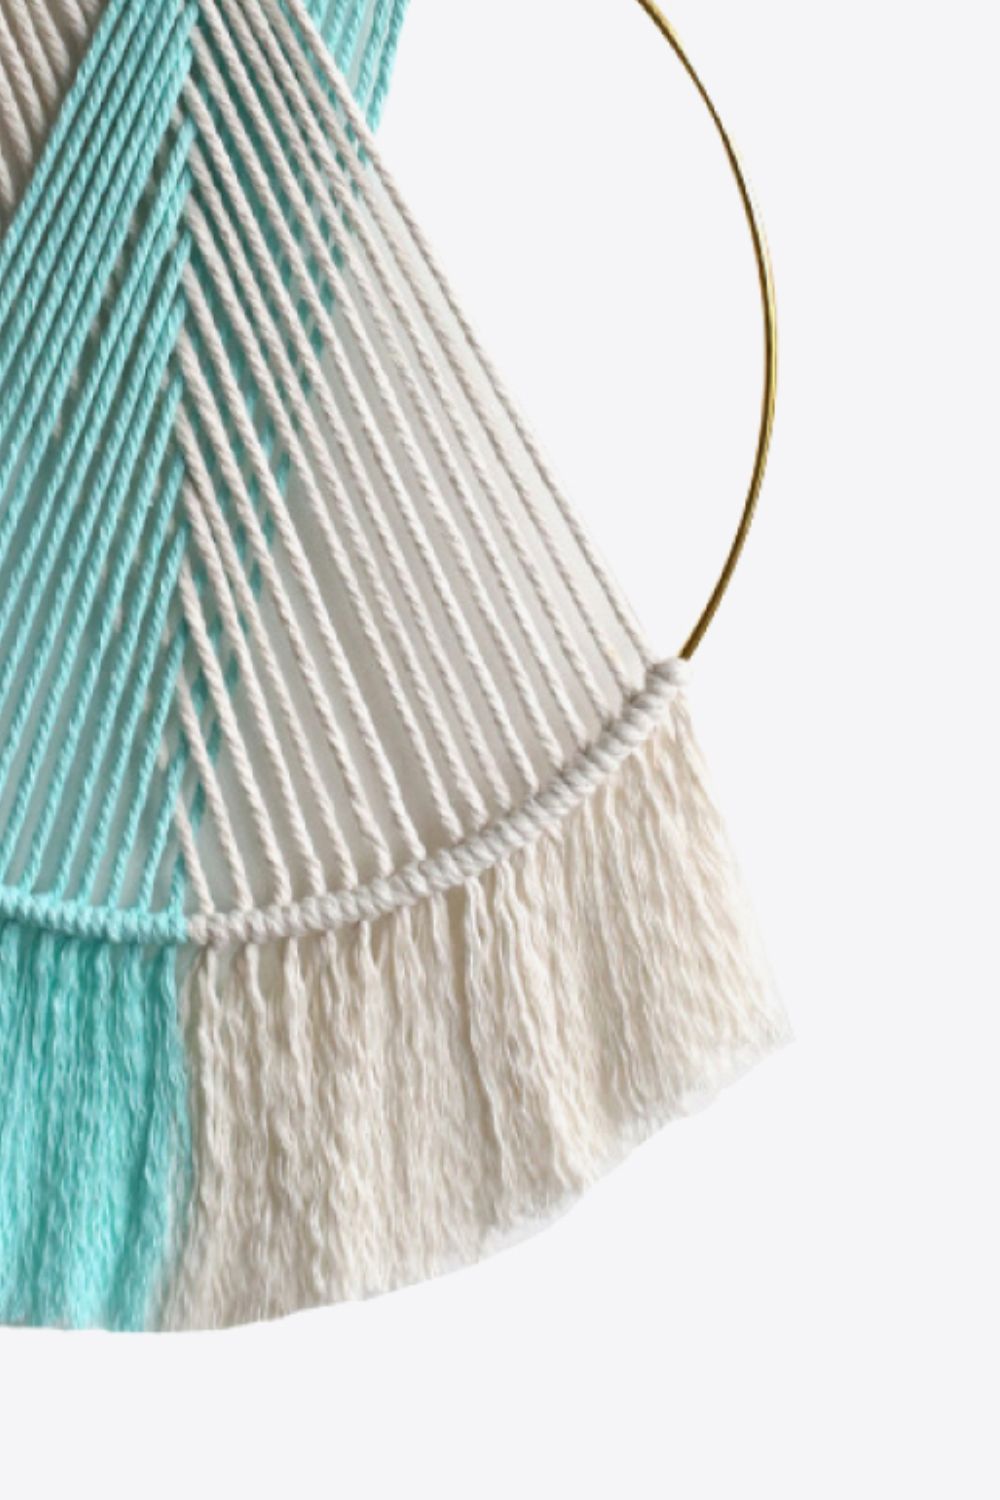 Contrast Fringe Round Macrame Wall Hanging Print on any thing USA/STOD clothes